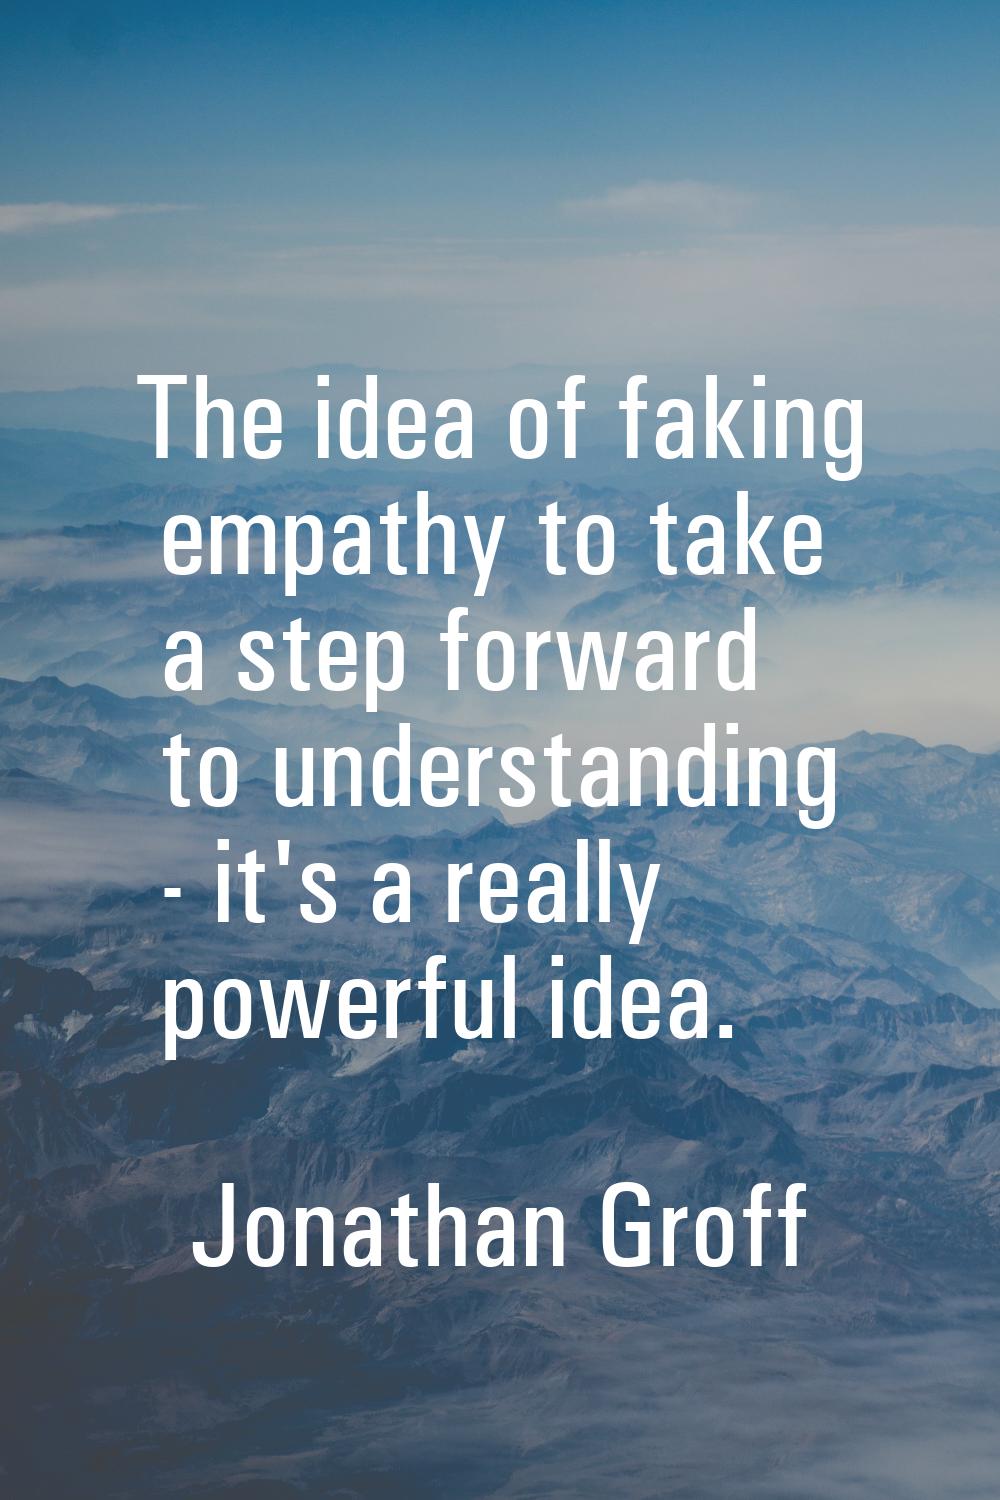 The idea of faking empathy to take a step forward to understanding - it's a really powerful idea.